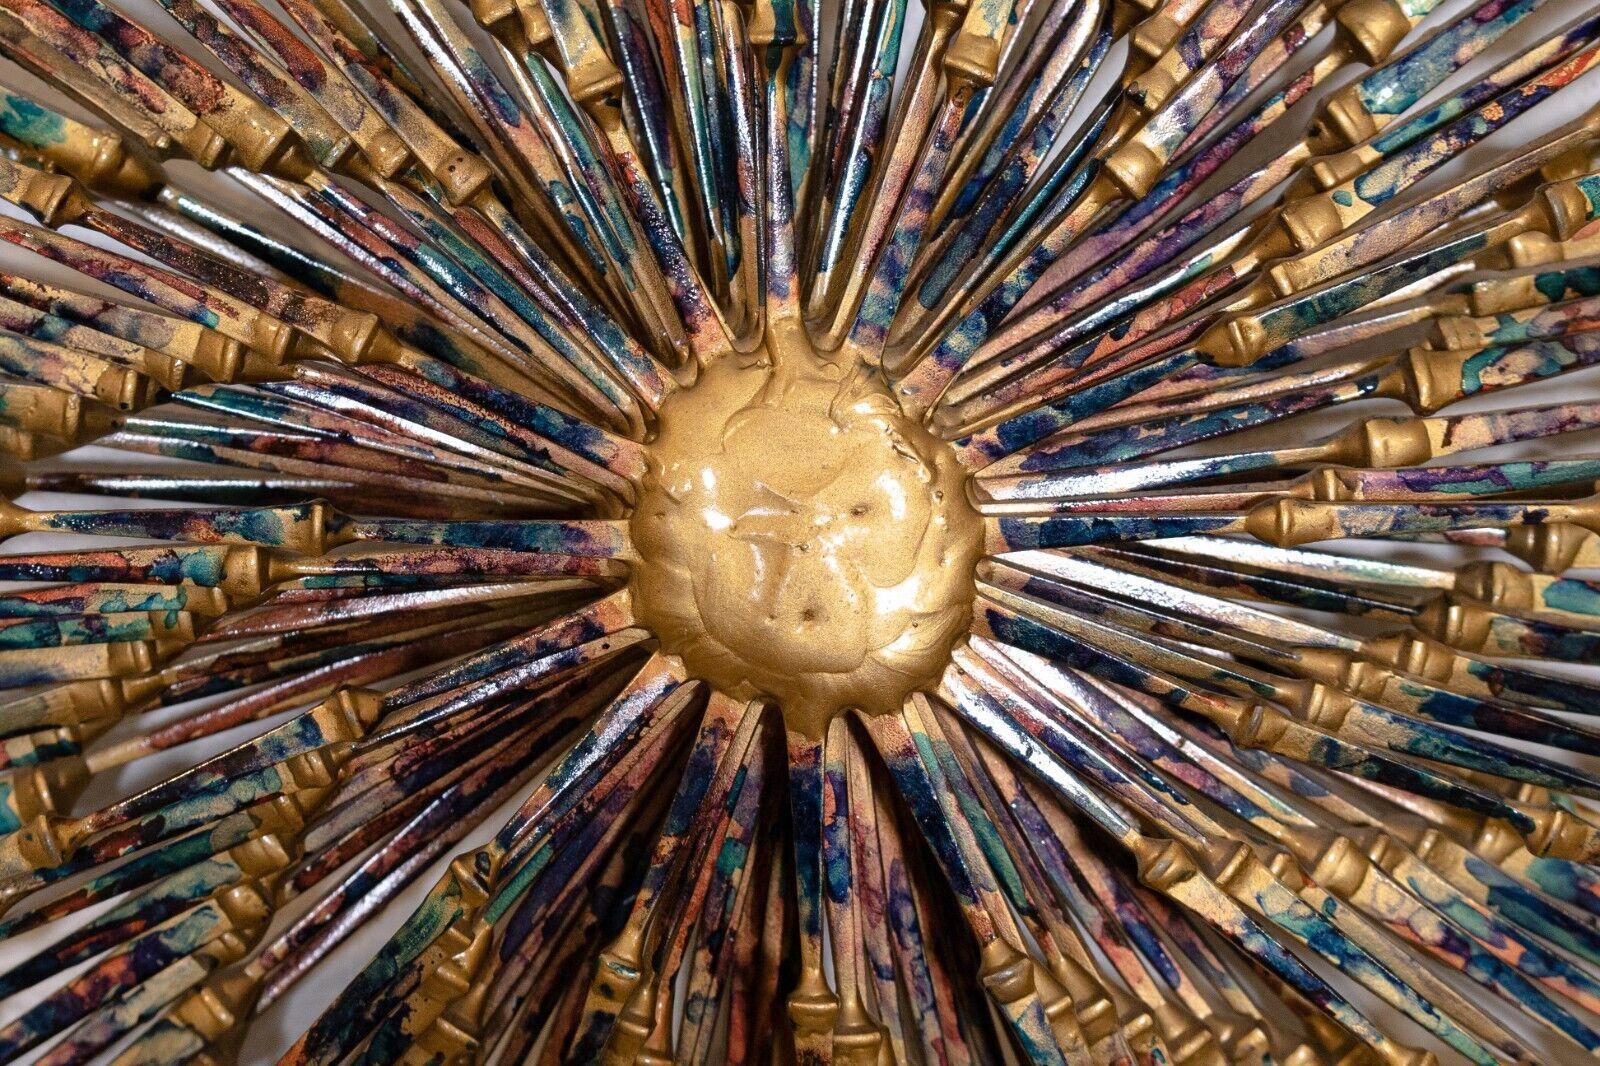 A marvelous brutalist wall sculpture made of metal and iron nails by Ron Schmidt. In a starburst/sunburst/pinwheel design that is highly sought after for a Mid-Century Modern aesthetic. This sculpture has a unique finish of metal coating with gold,